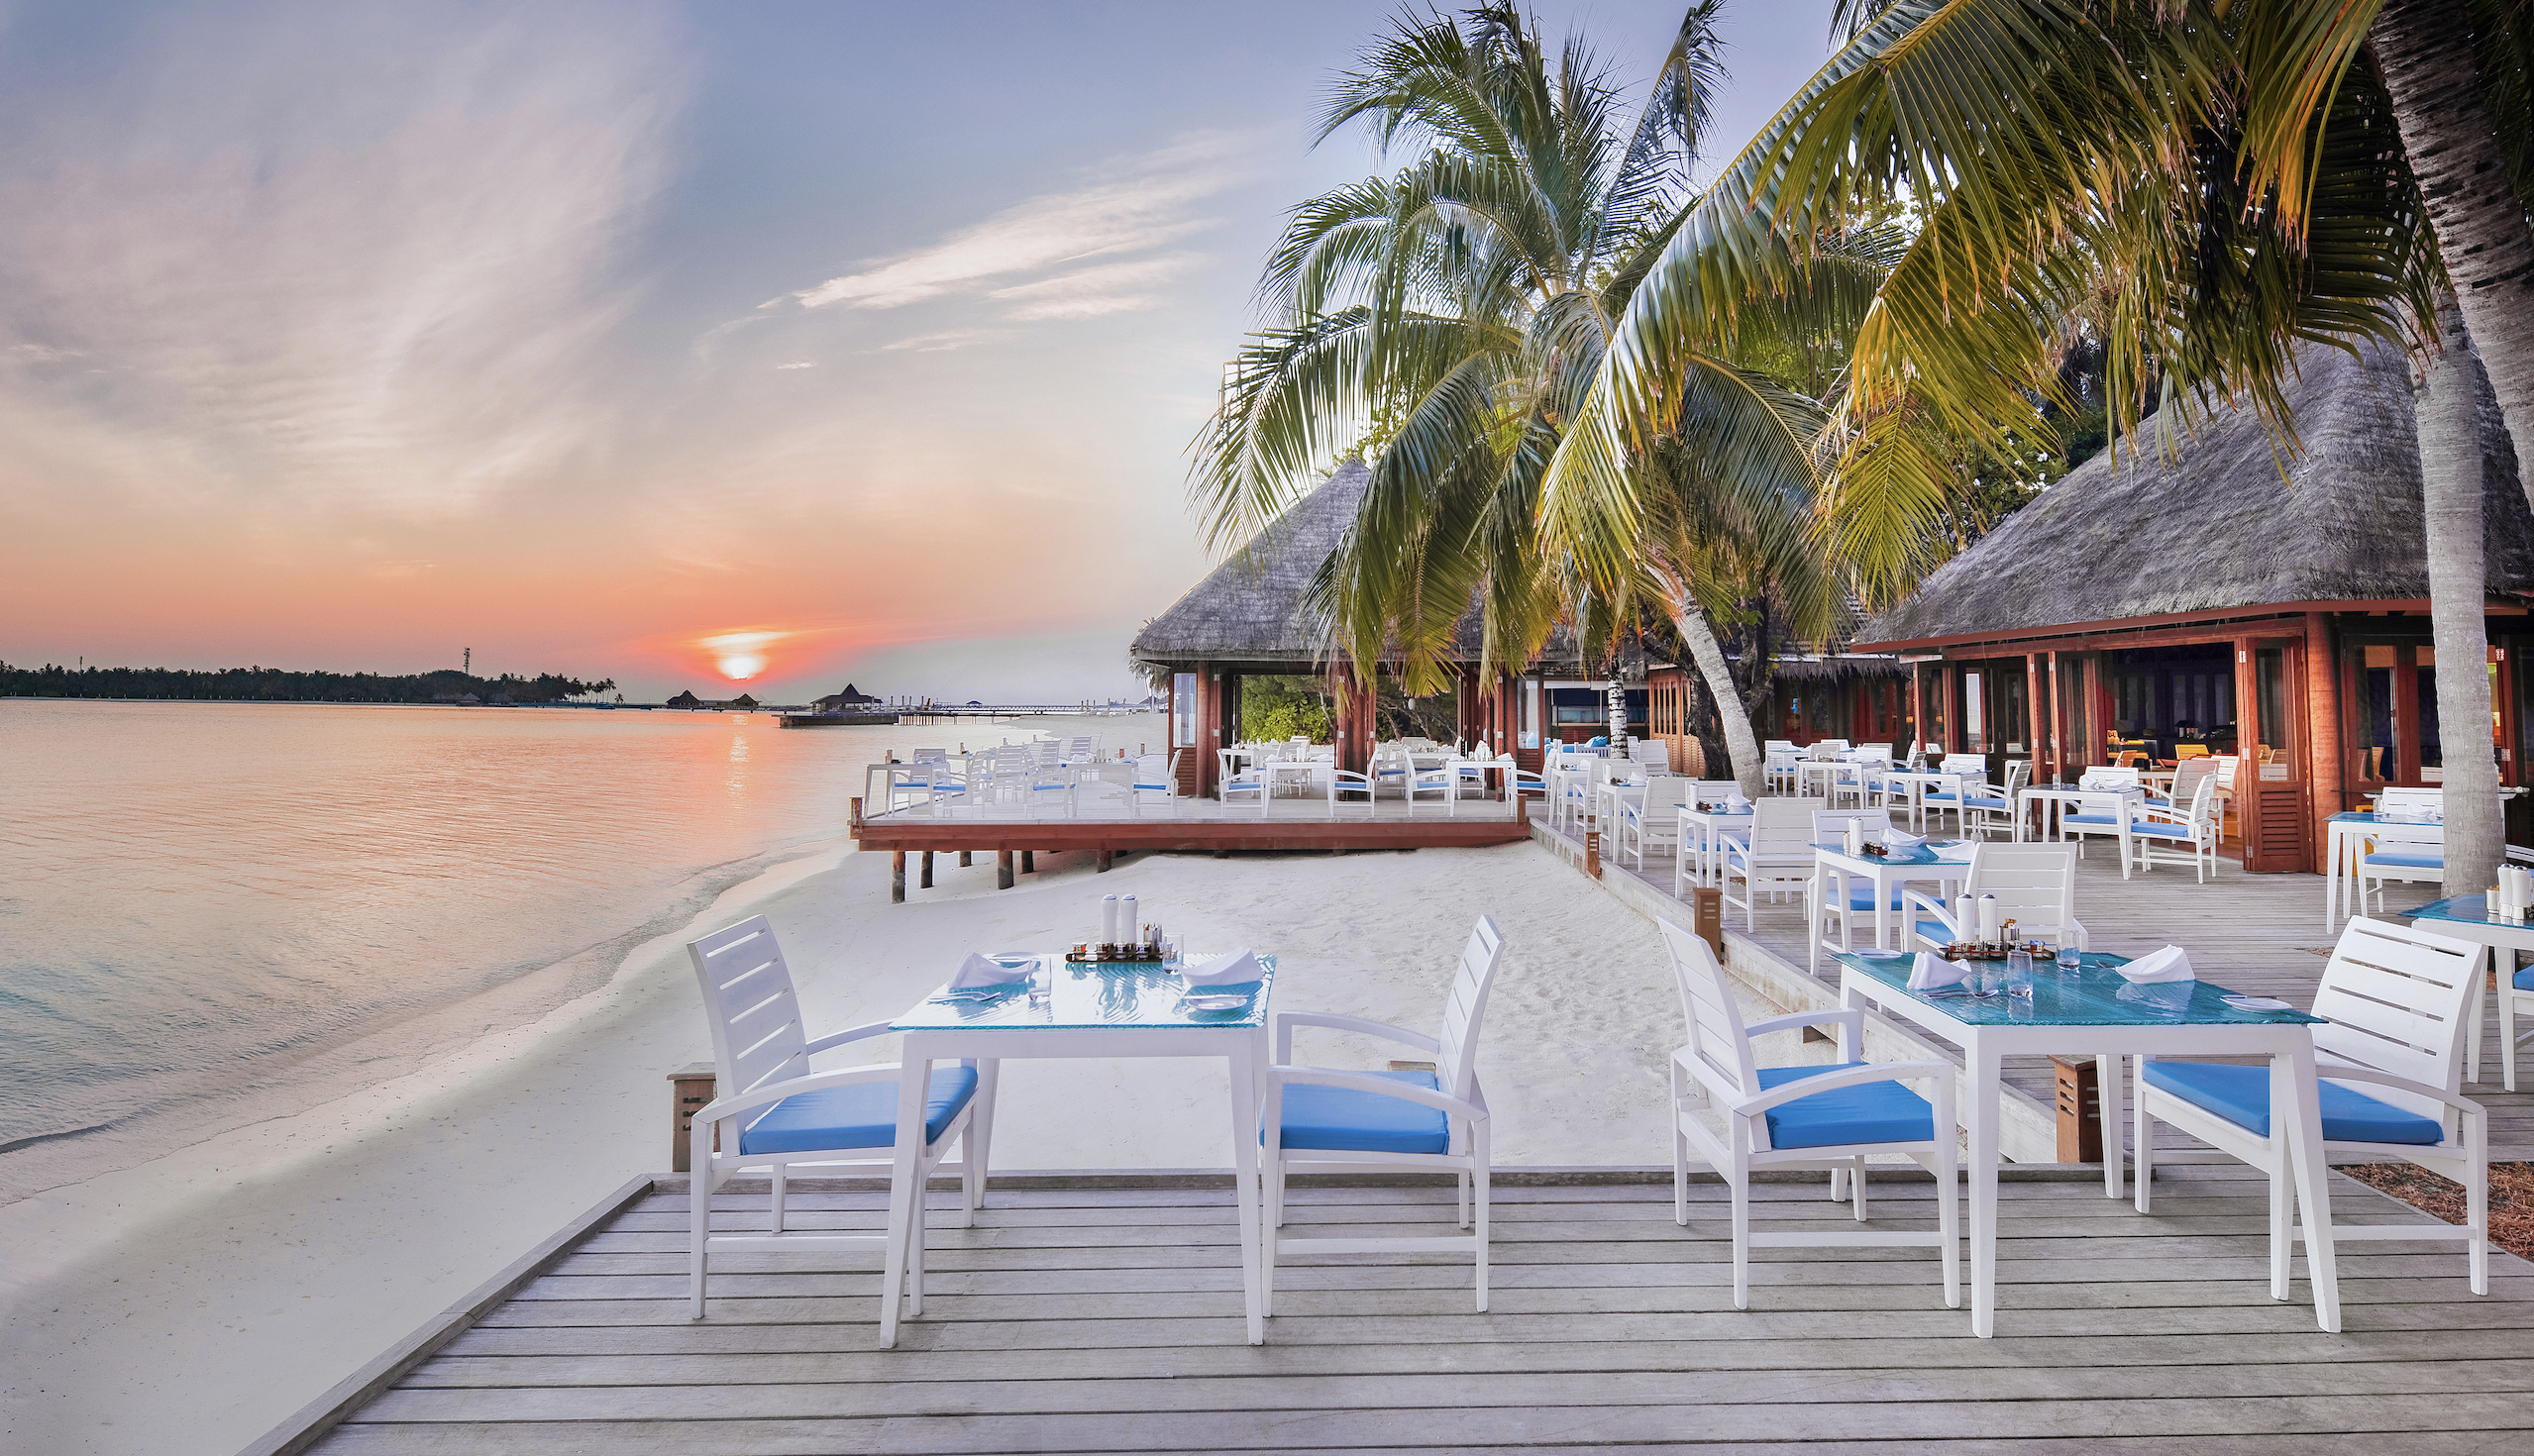 Dining on the beach in the Maldives